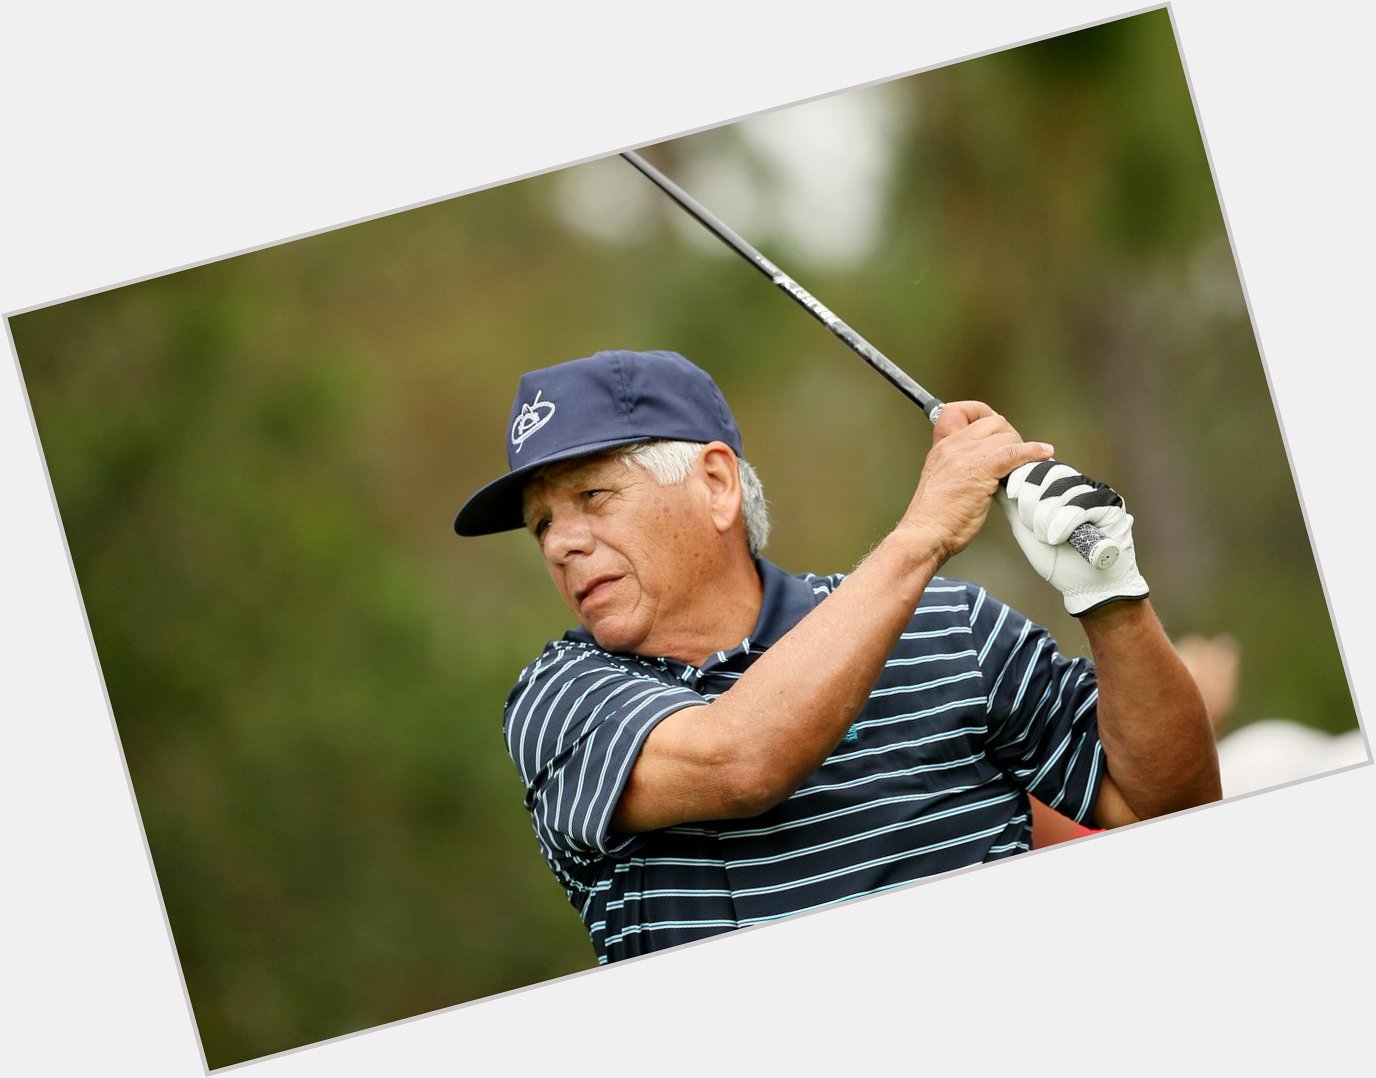 Happy 78th Birthday to 1974 New Orleans Champ Lee Trevino!  On which golf course did he win in \74? 